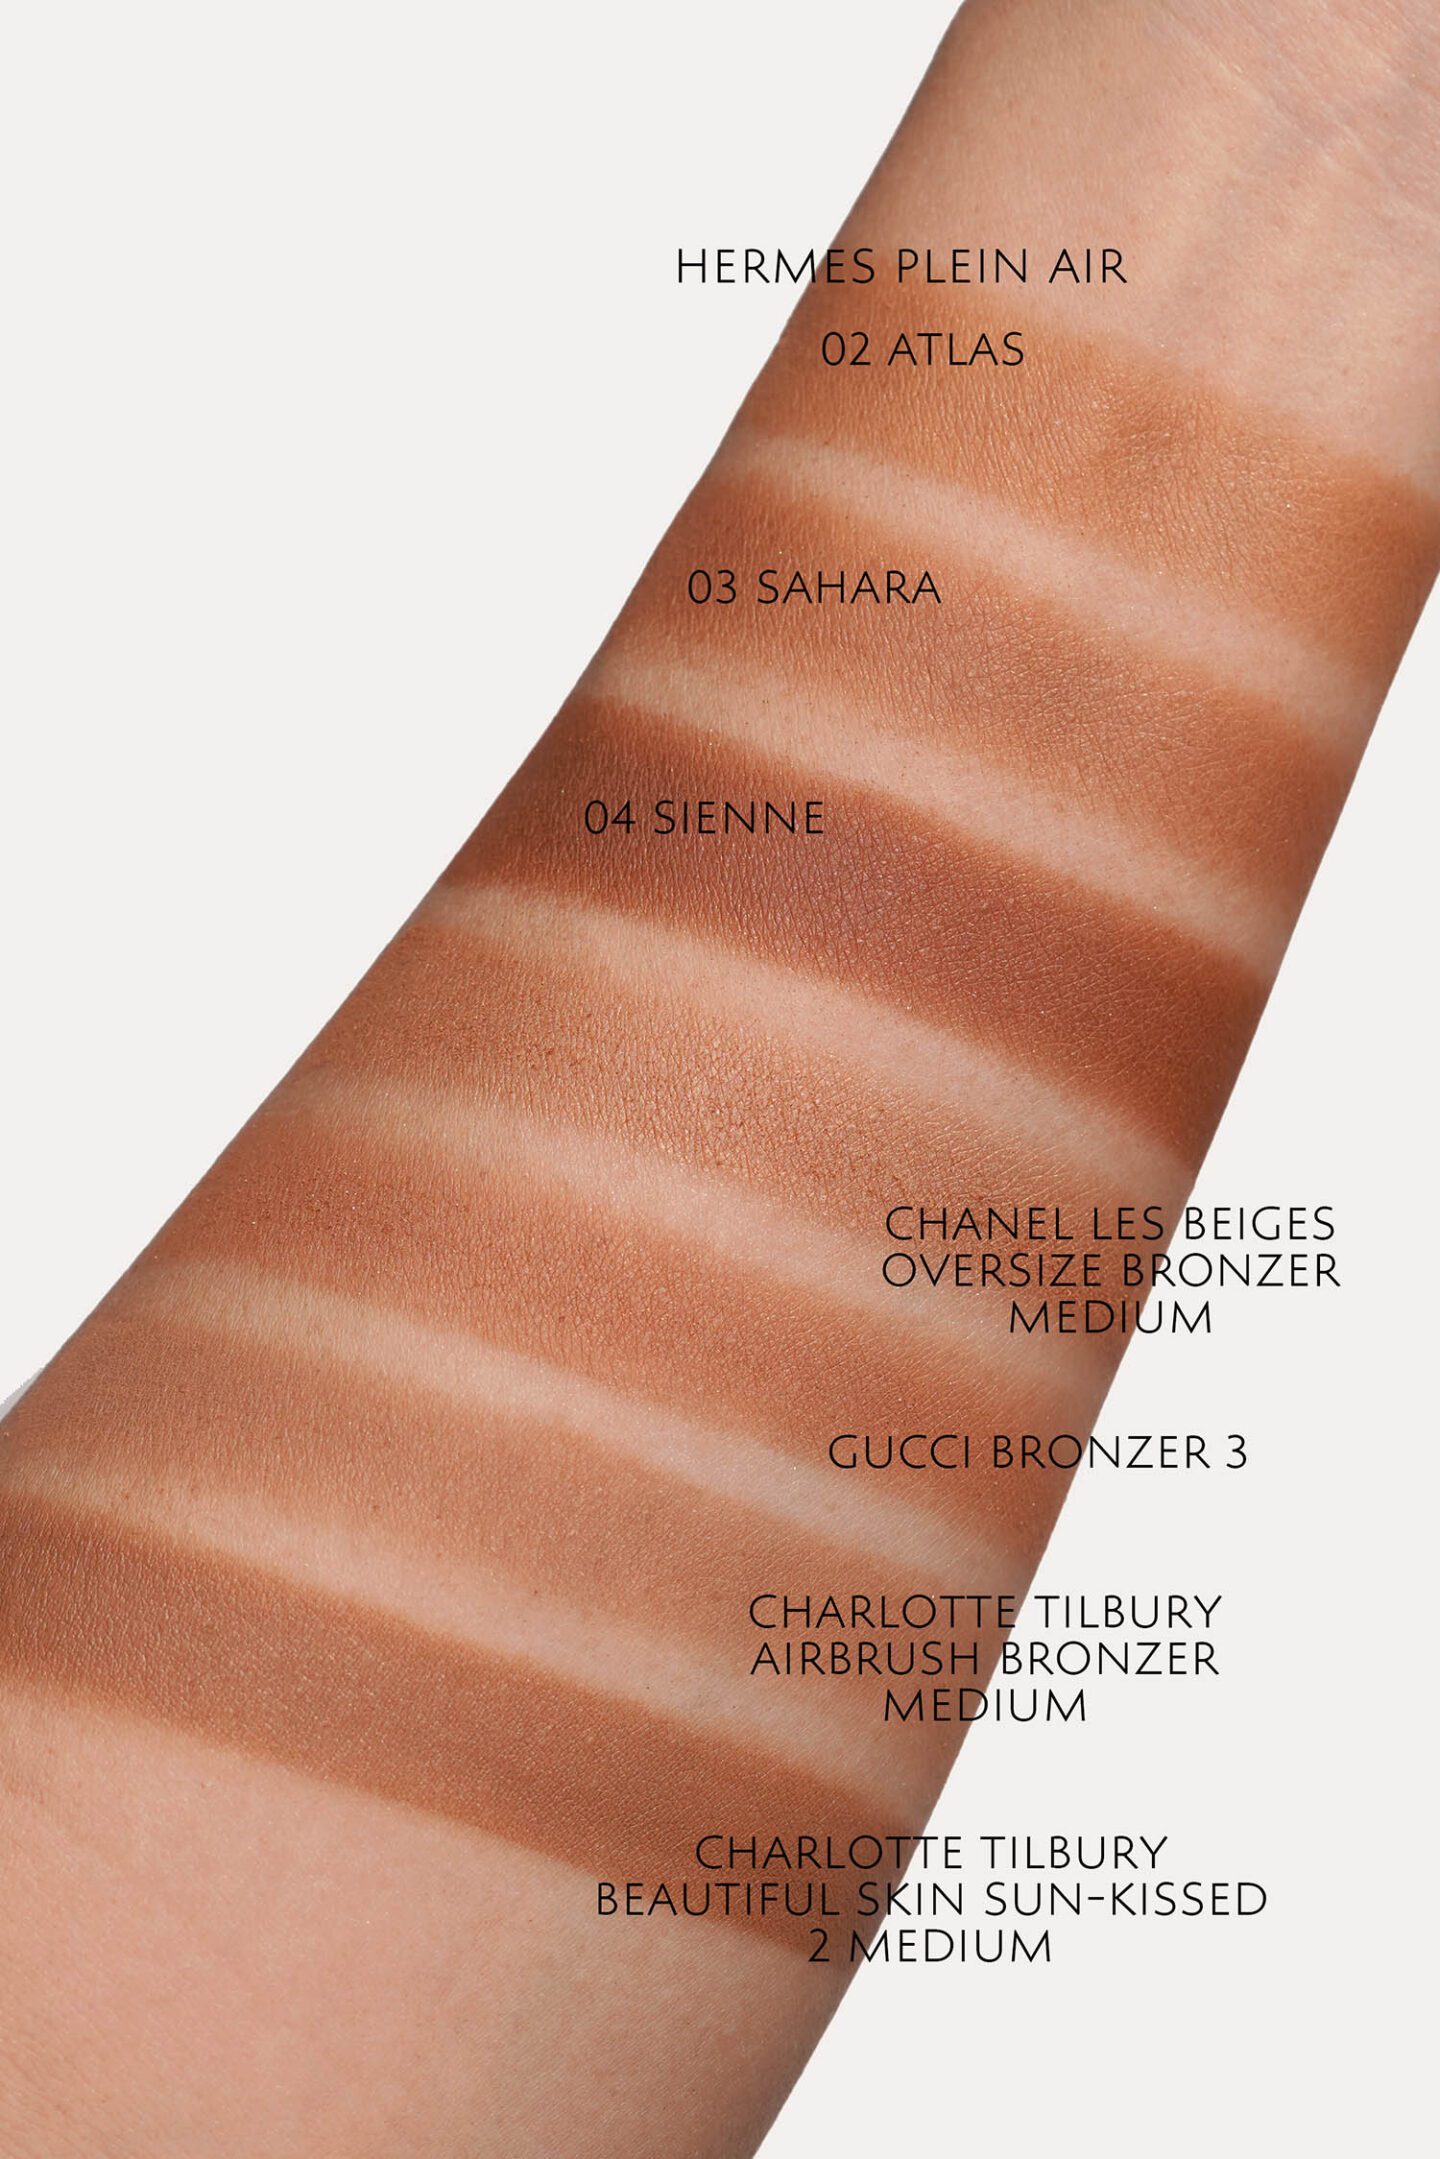 Hermes bronzer swatch comparisons to Charlotte Tilbury, Gucci and Chanel